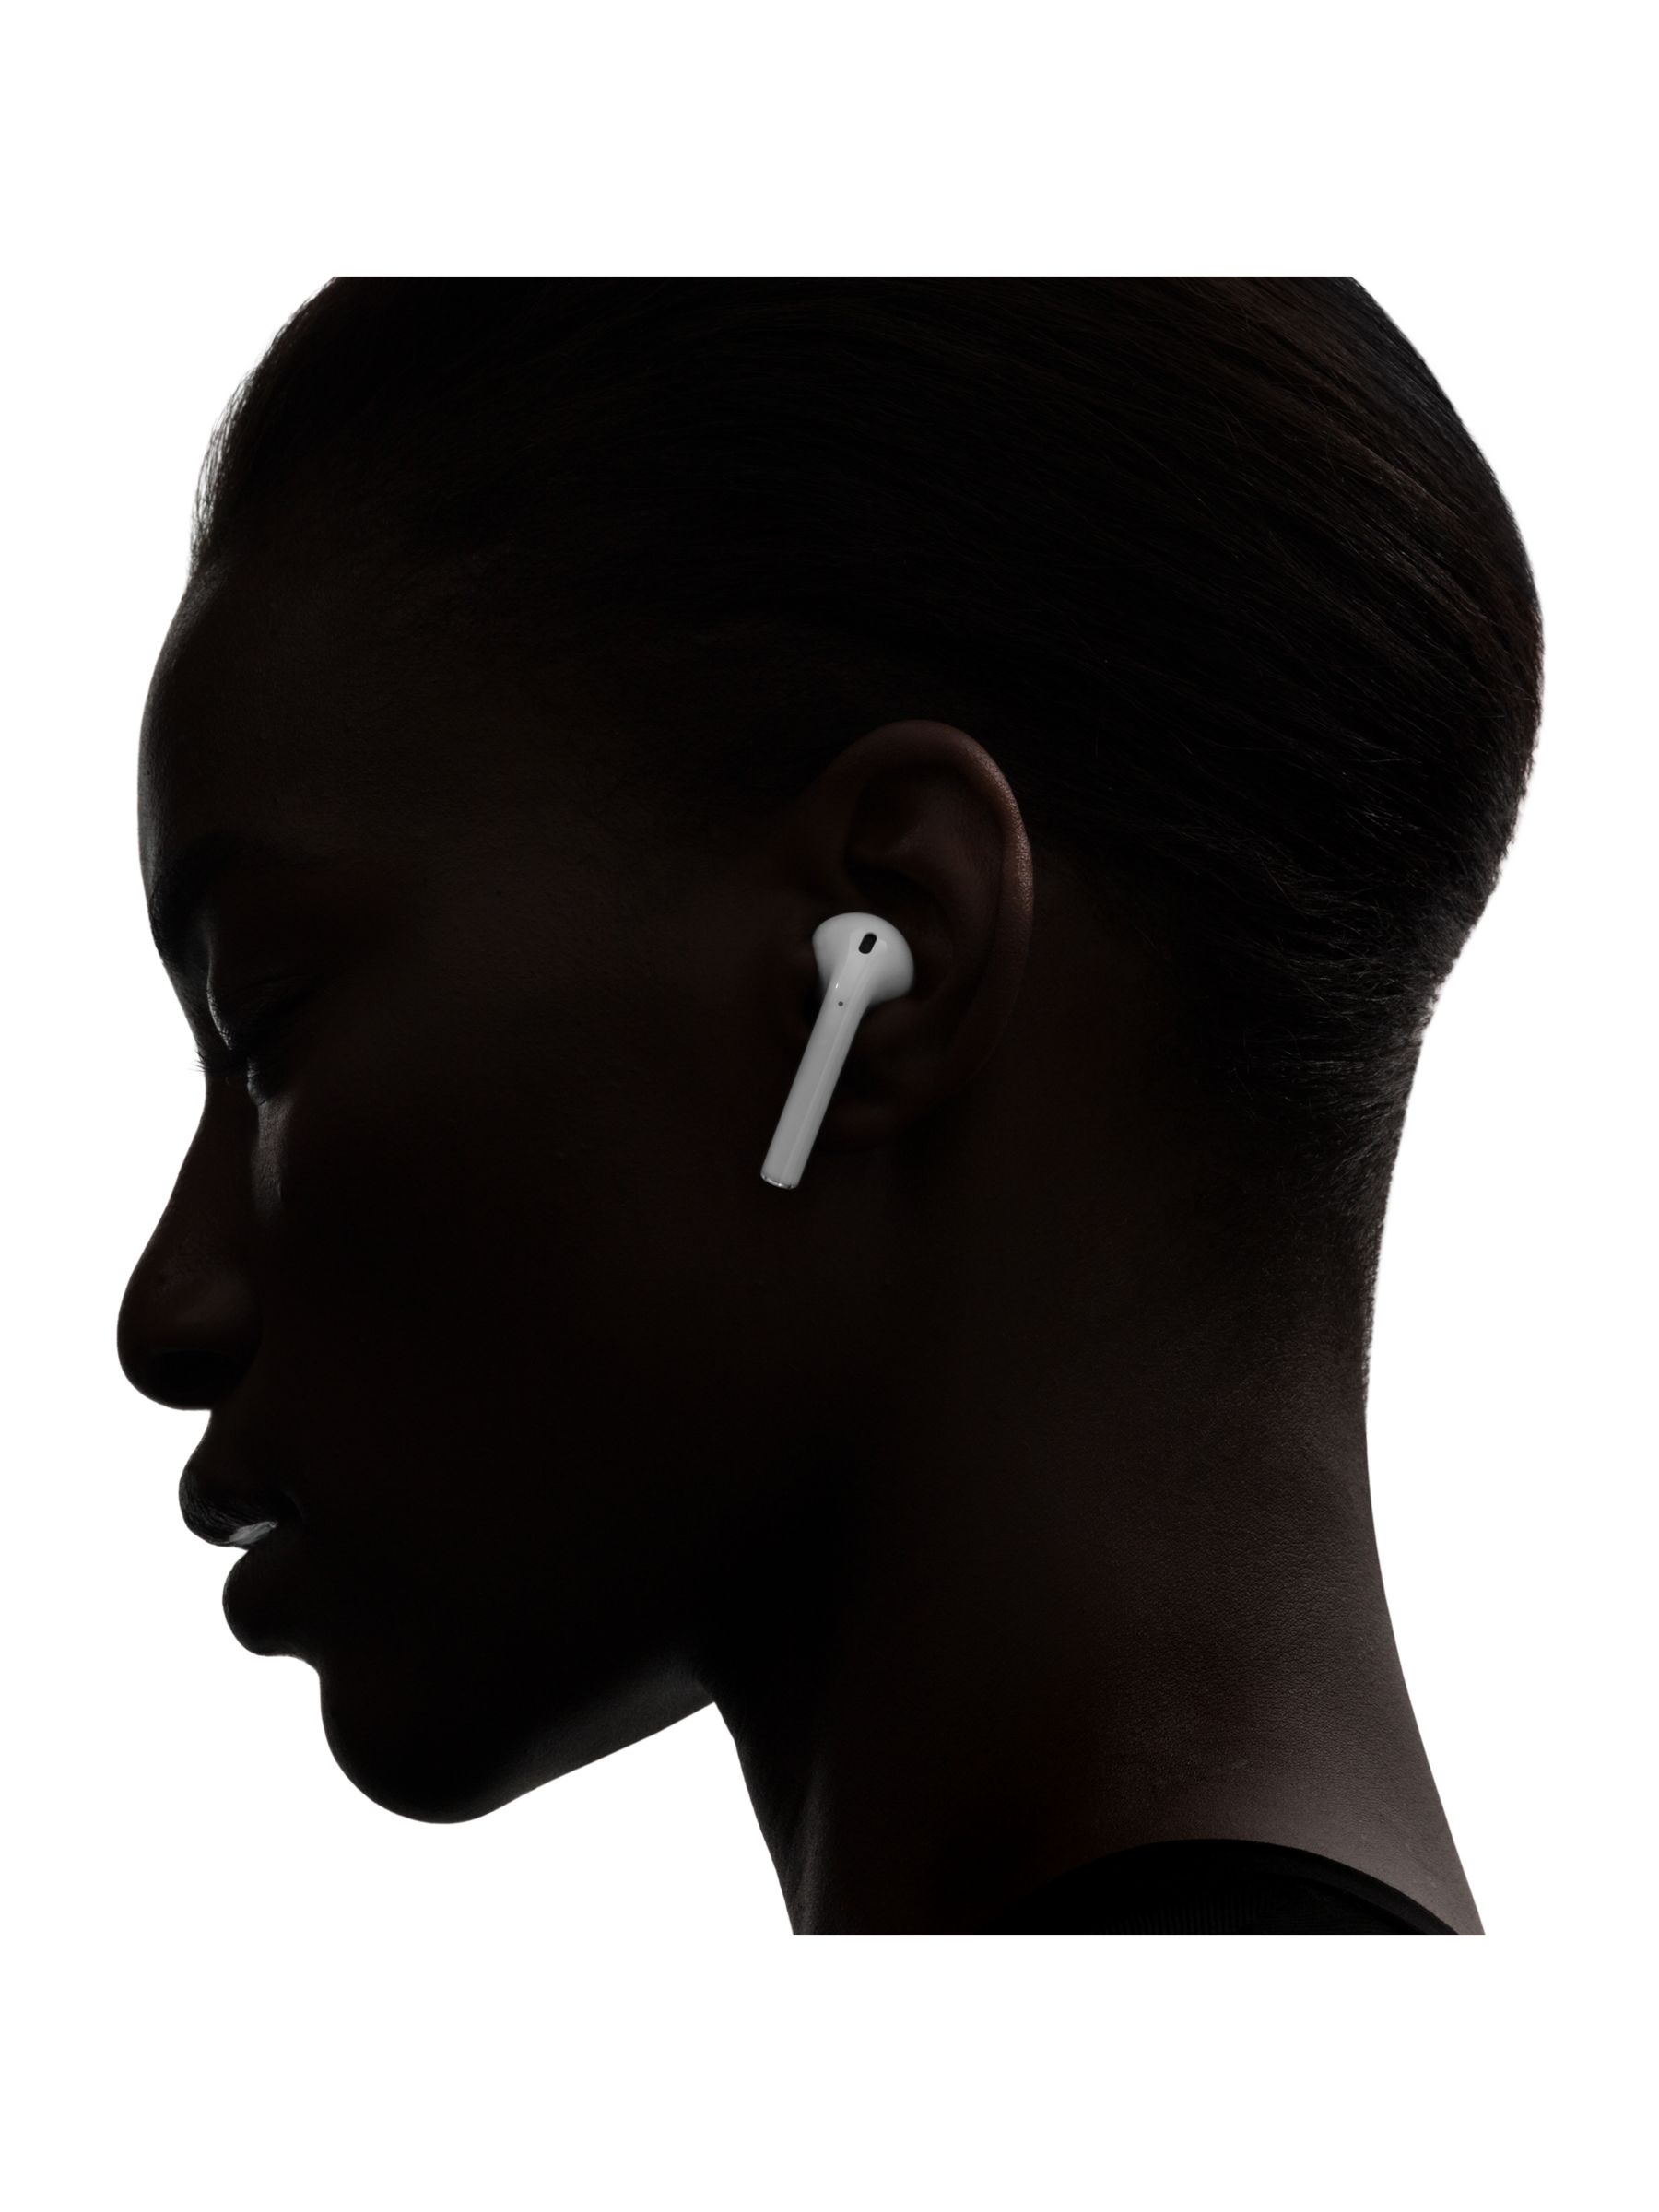 Apple AirPods with Charging Case (2nd Generation) 2019